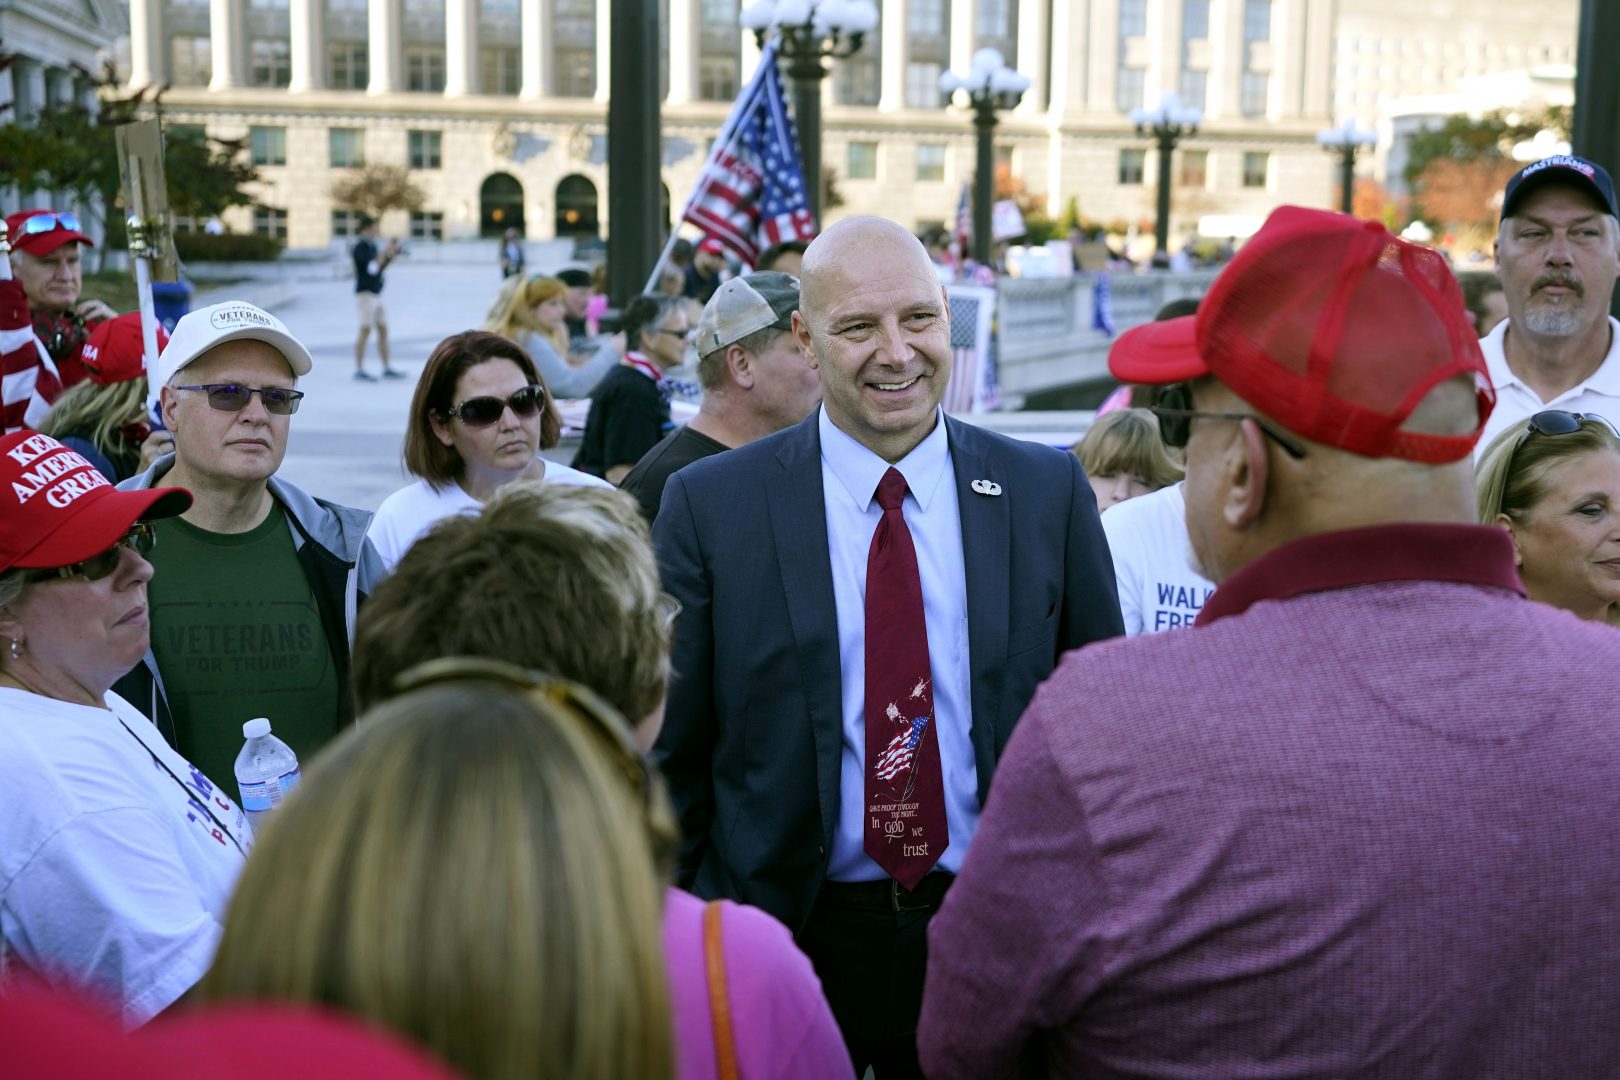 FILE PHOTO: Pennsylvania state Sen. Doug Mastriano, R-Franklin, center, speaks to supporters of President Donald Trump as they demonstrate outside the Pennsylvania State Capitol, Saturday, Nov. 7, 2020, in Harrisburg, Pa., after Democrat Joe Biden defeated Trump to become 46th president of the United States.